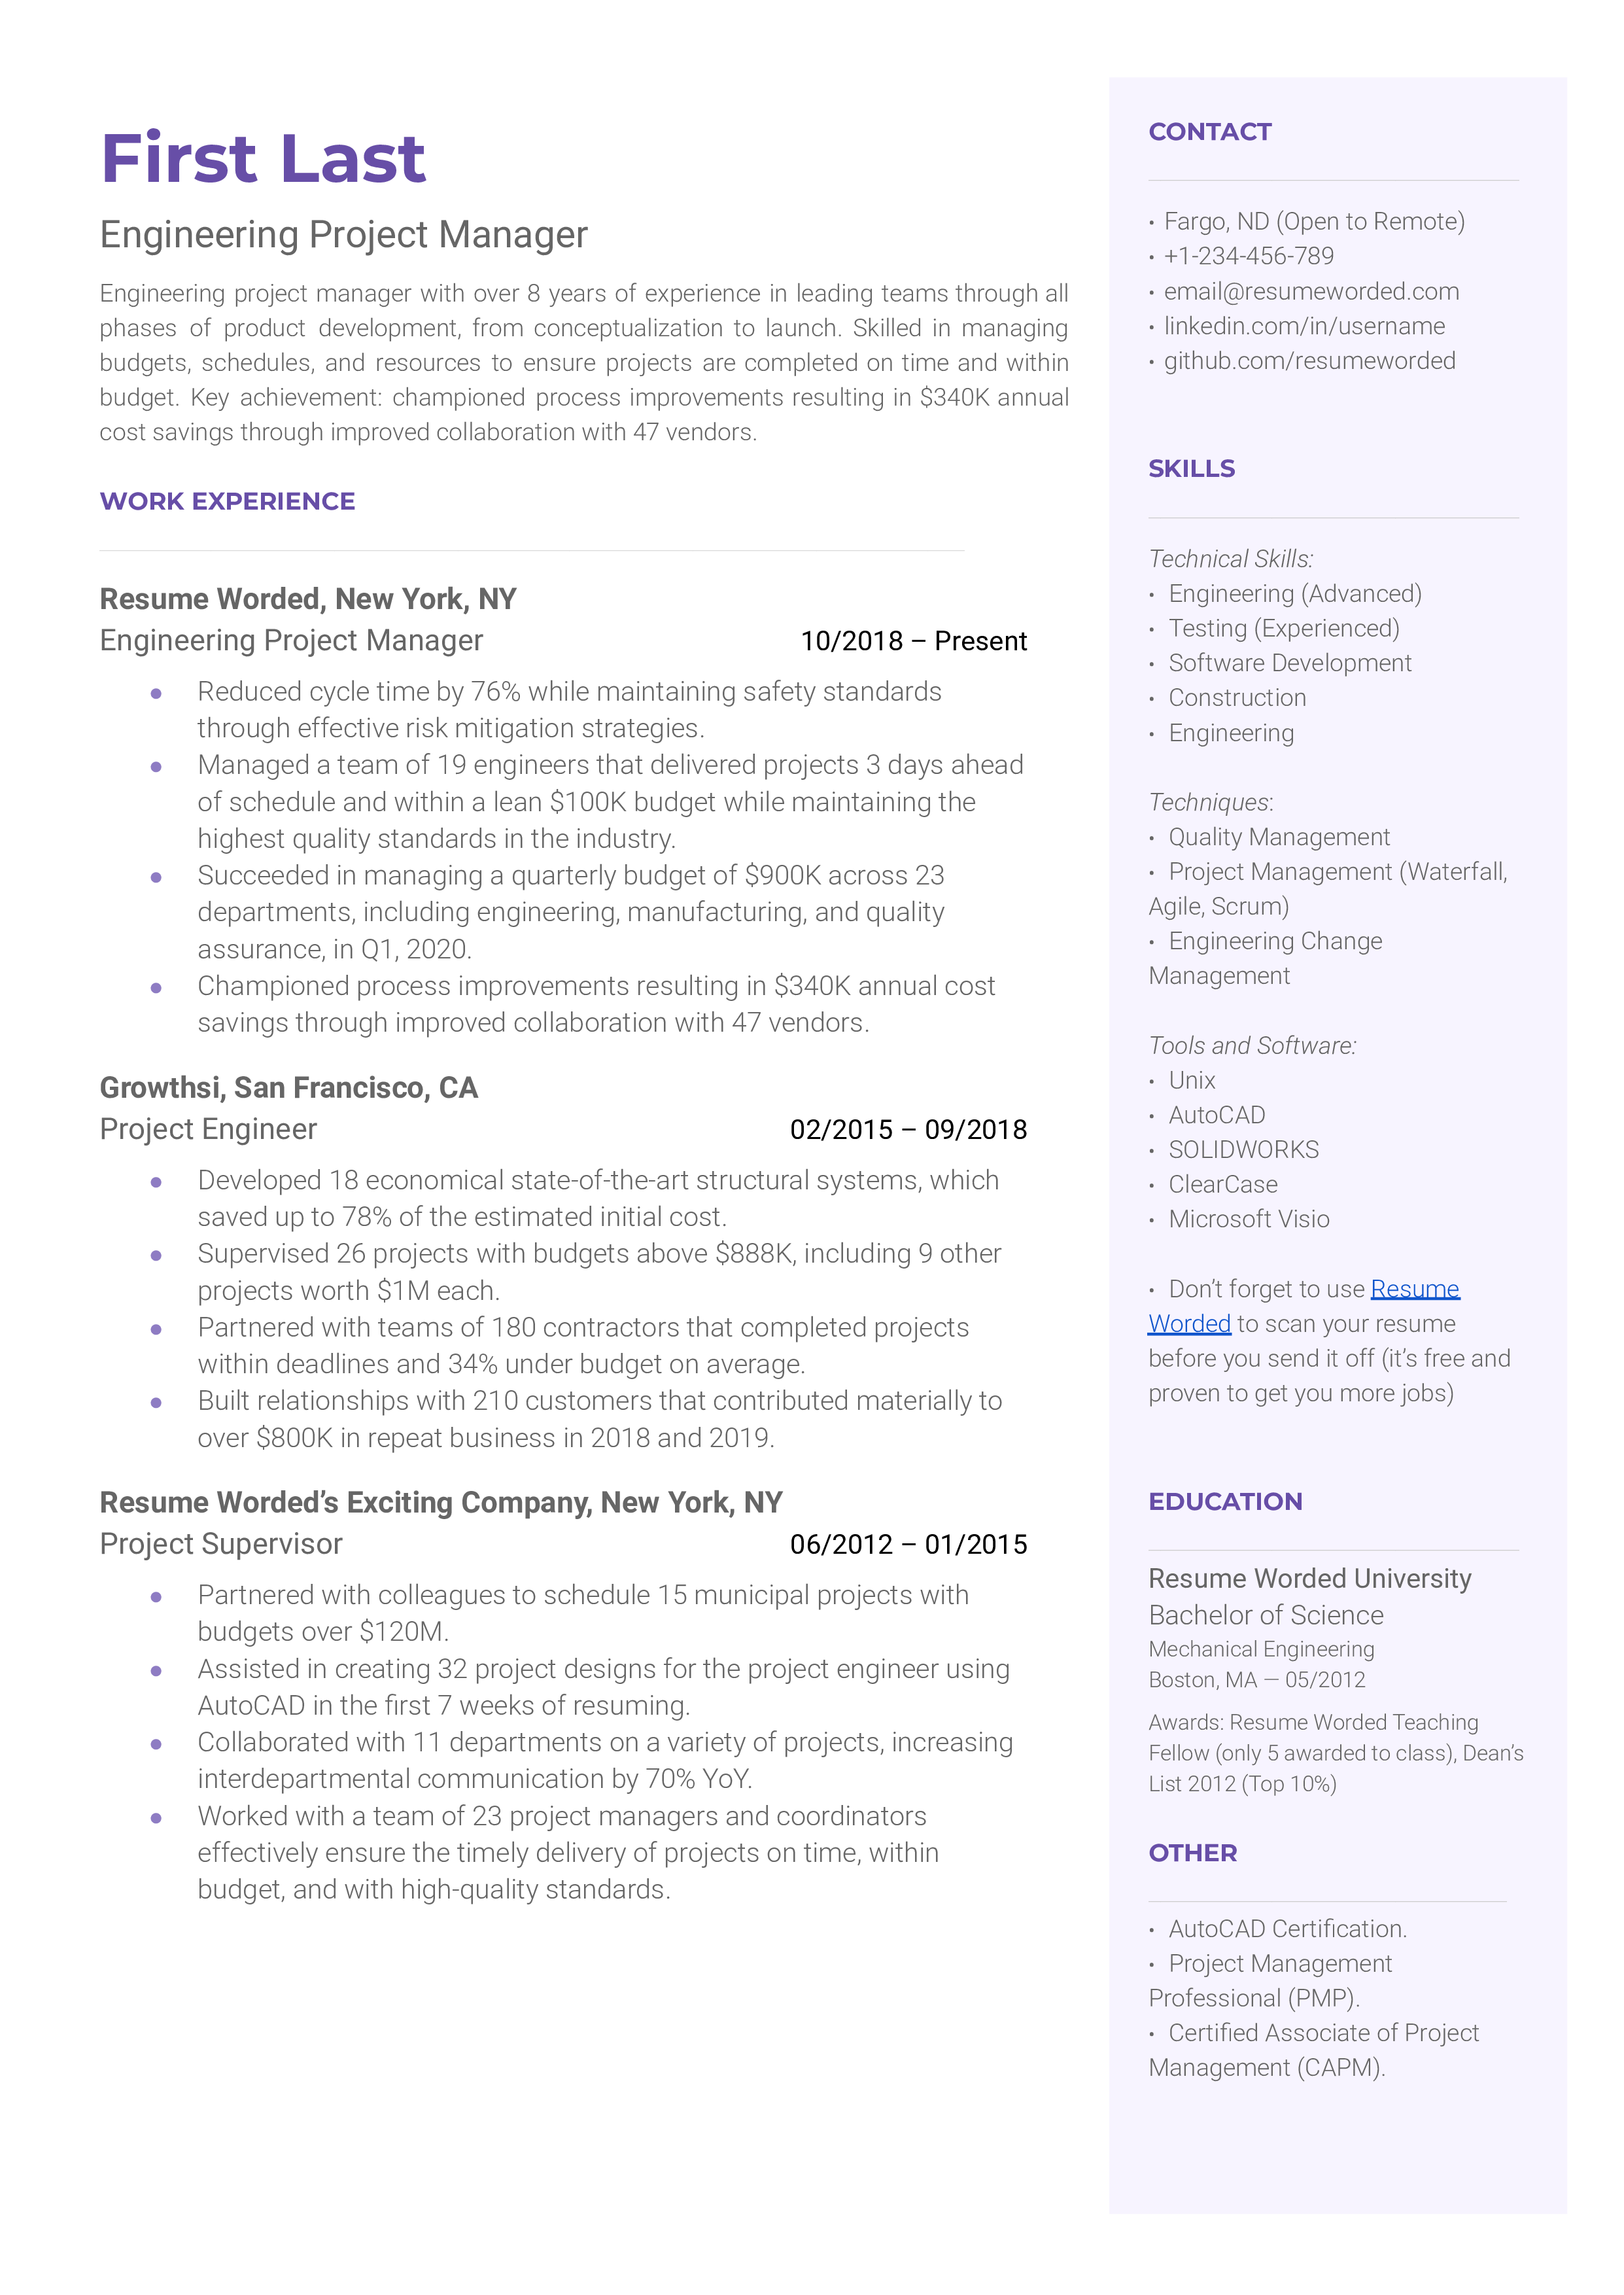 An engineering project manager resume sample that highlights the applicant's engineering background and knowledge.